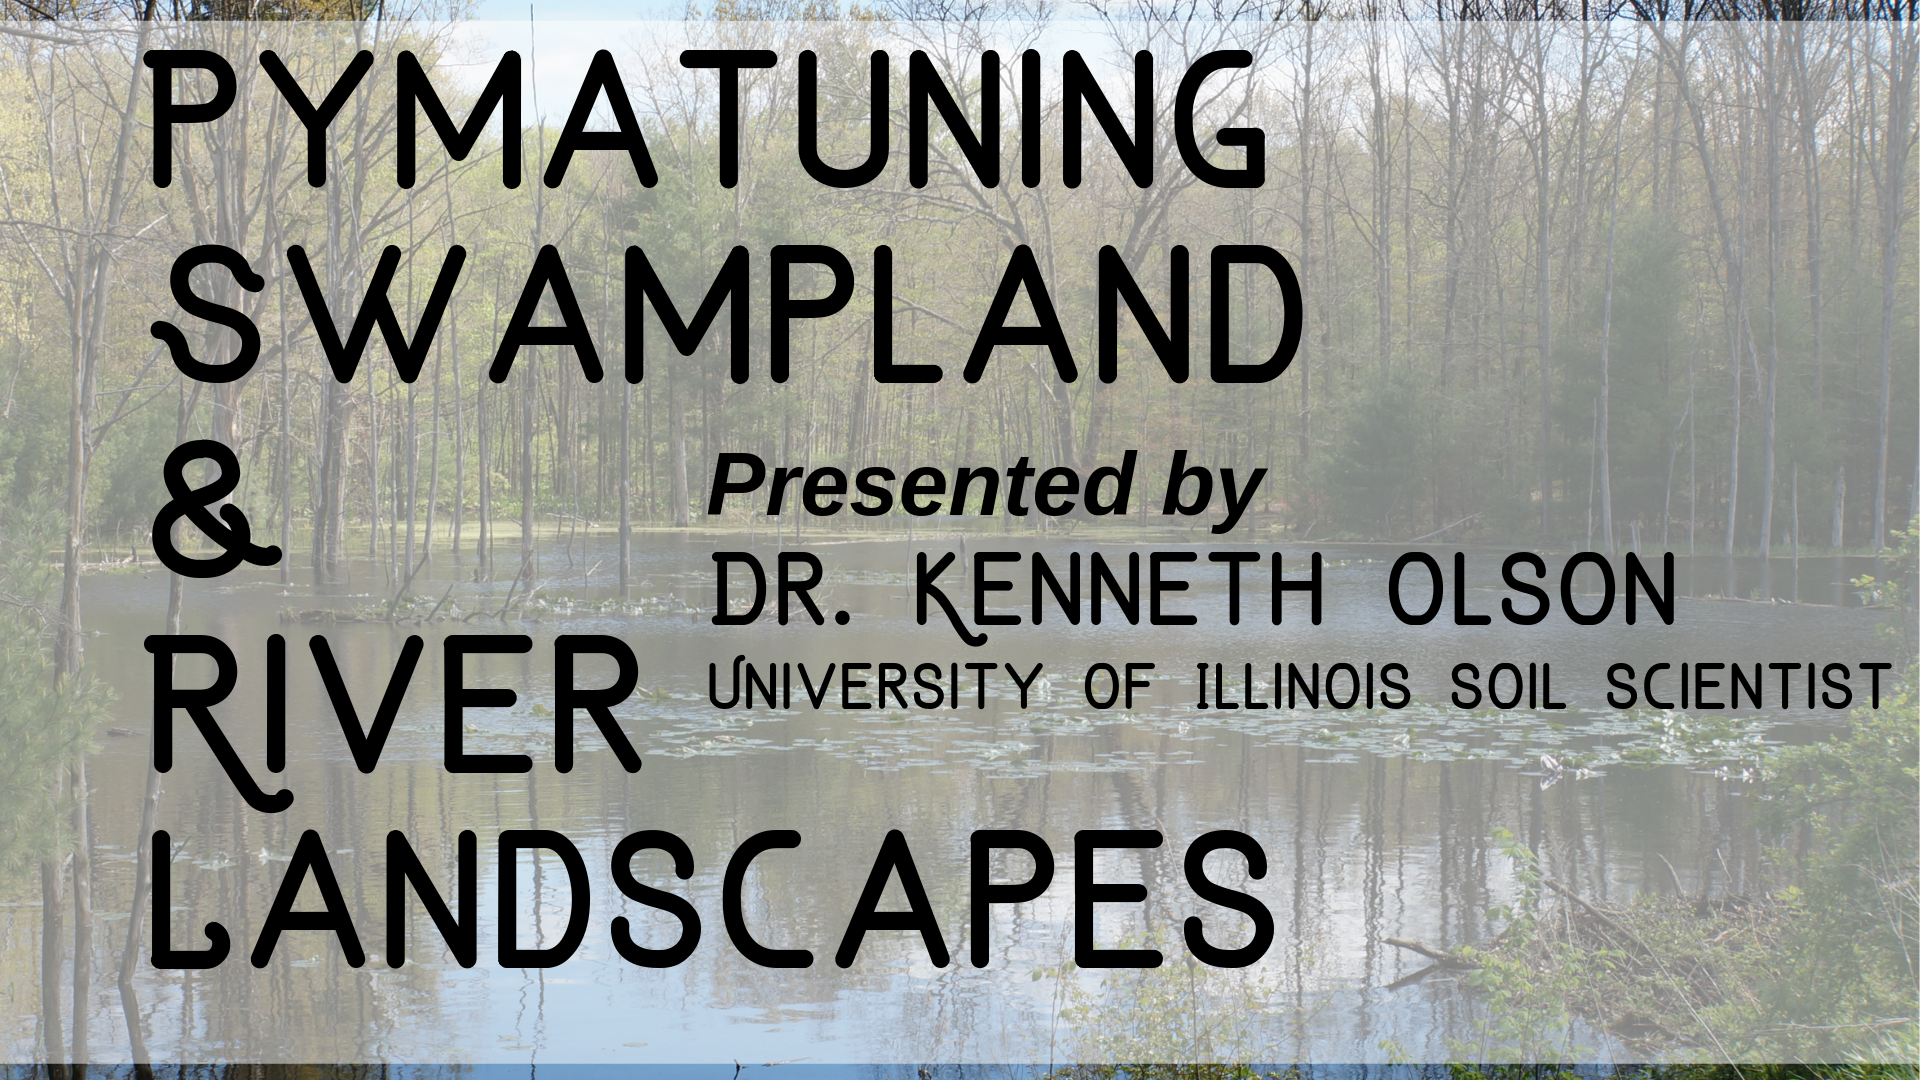 Pymatuning Swampland and River Landscapes